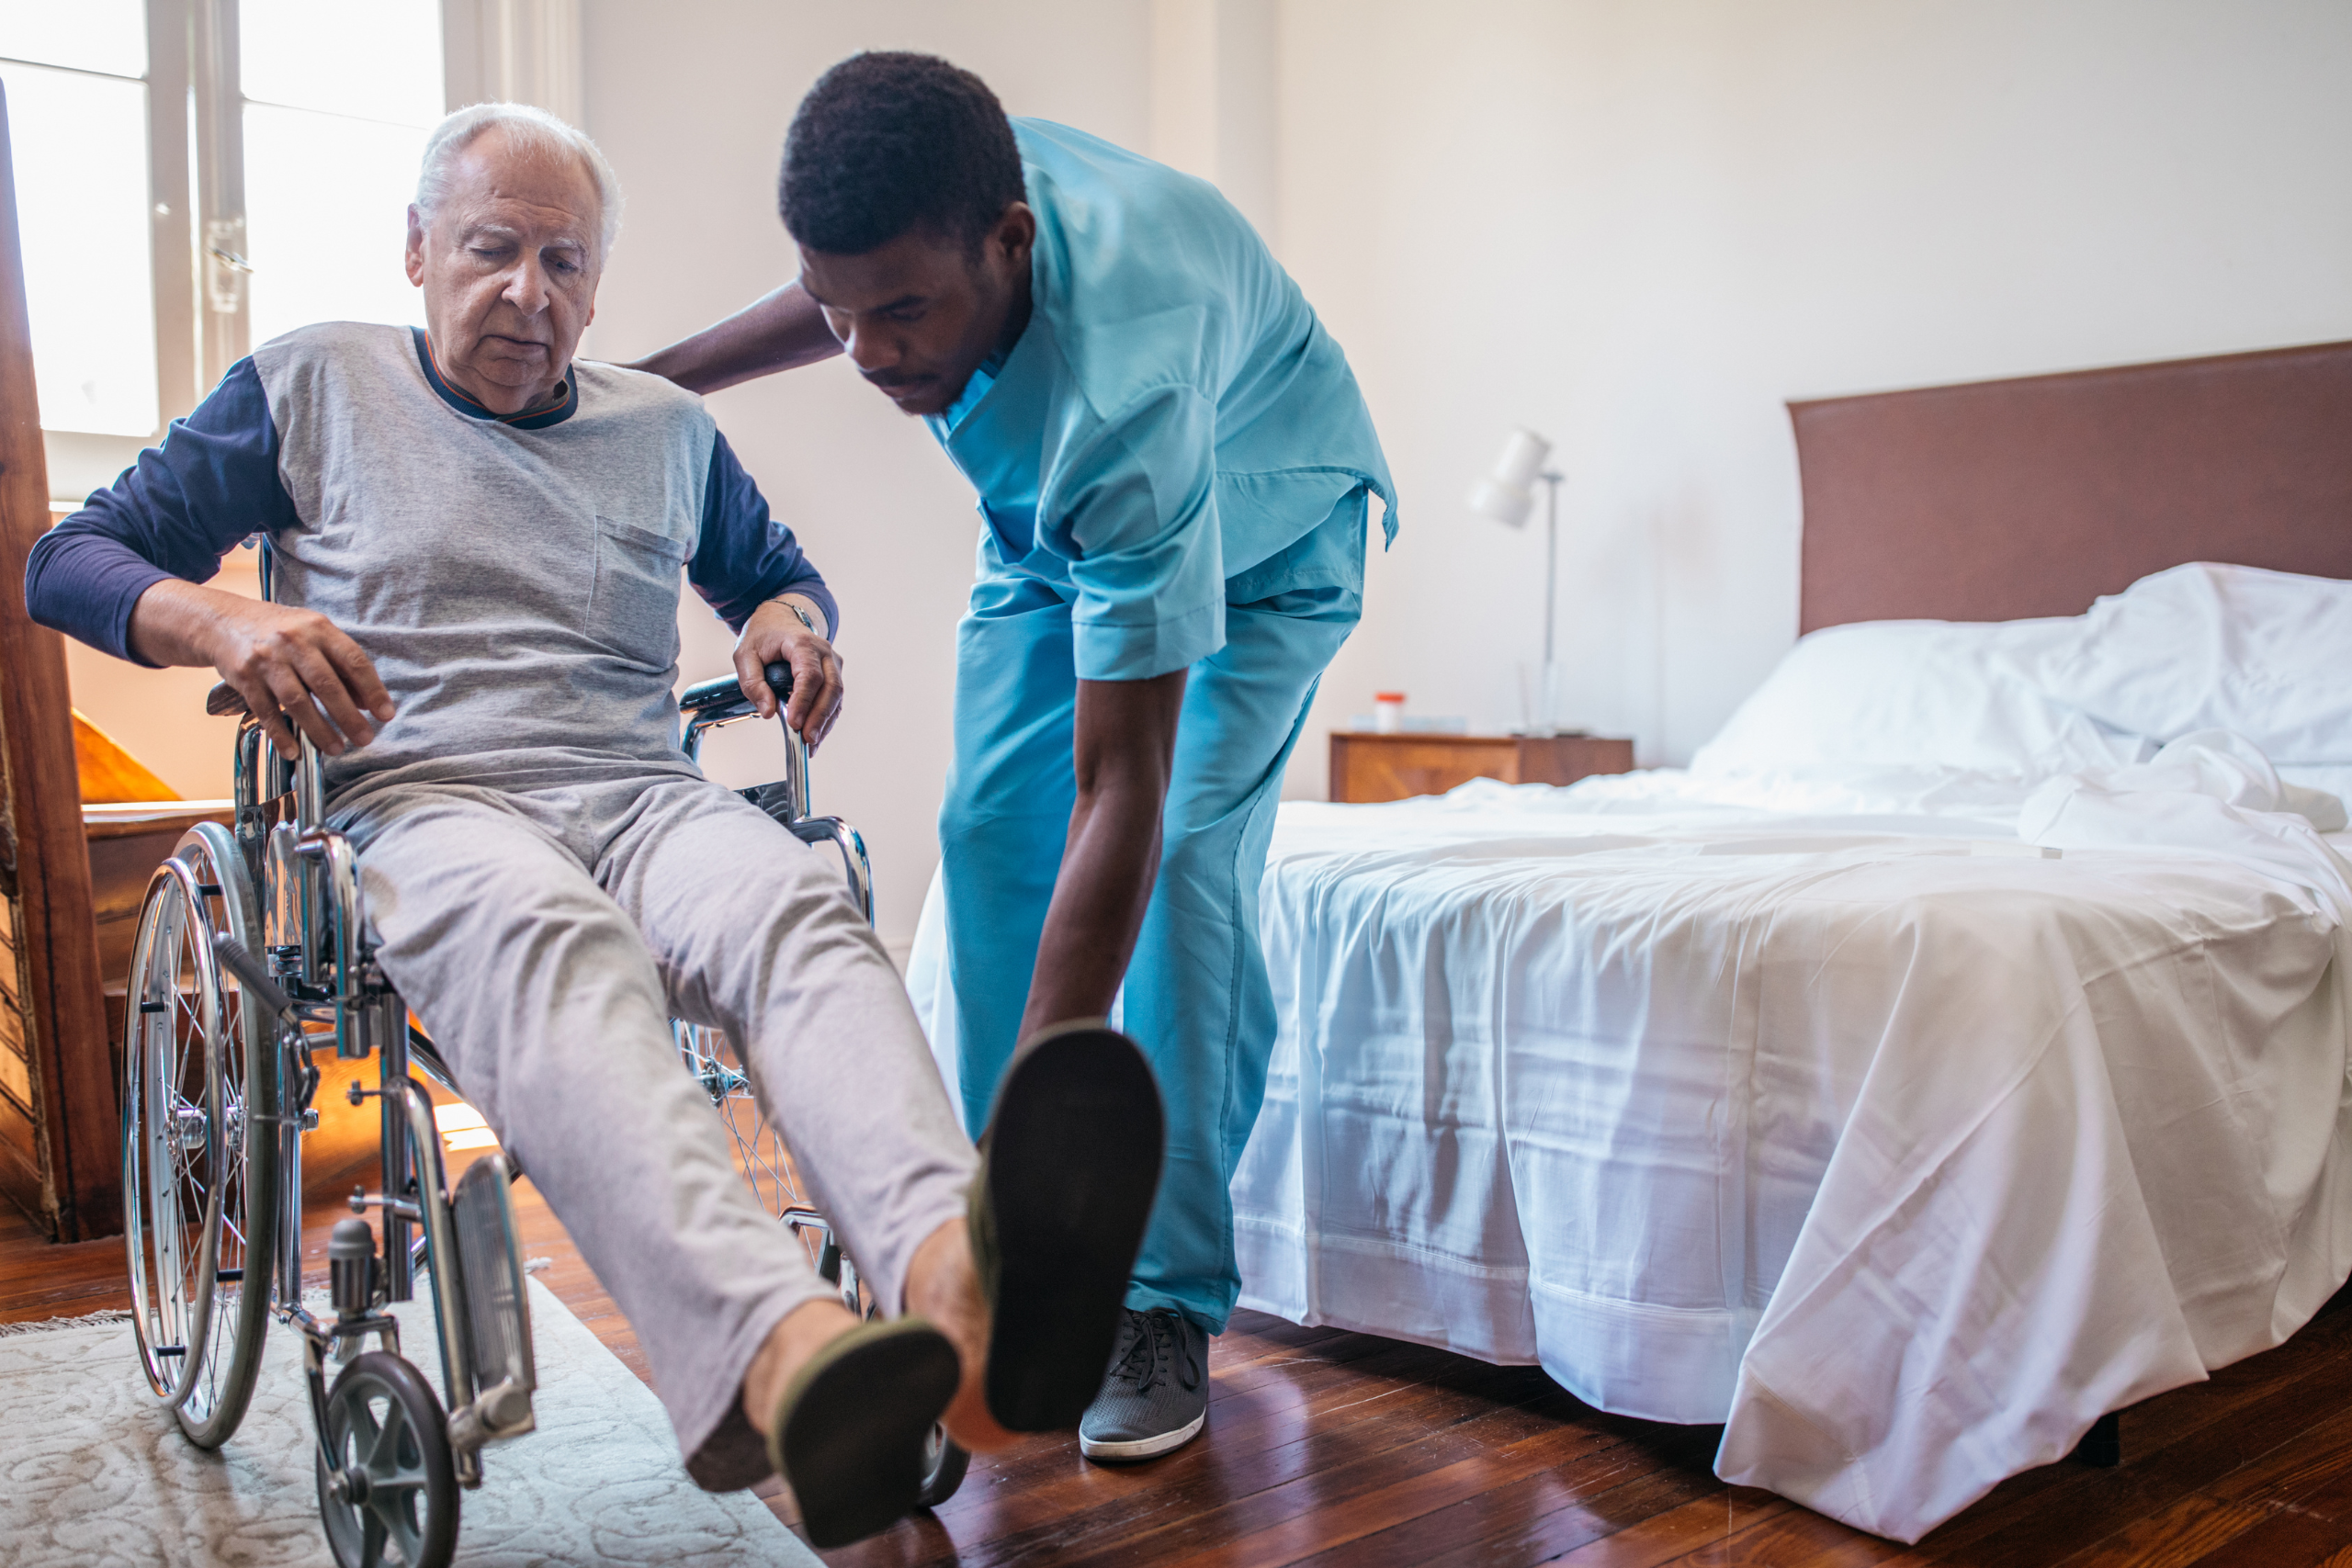 A caregiver assists an elderly man in a wheelchair near a bed in a brightly lit room.